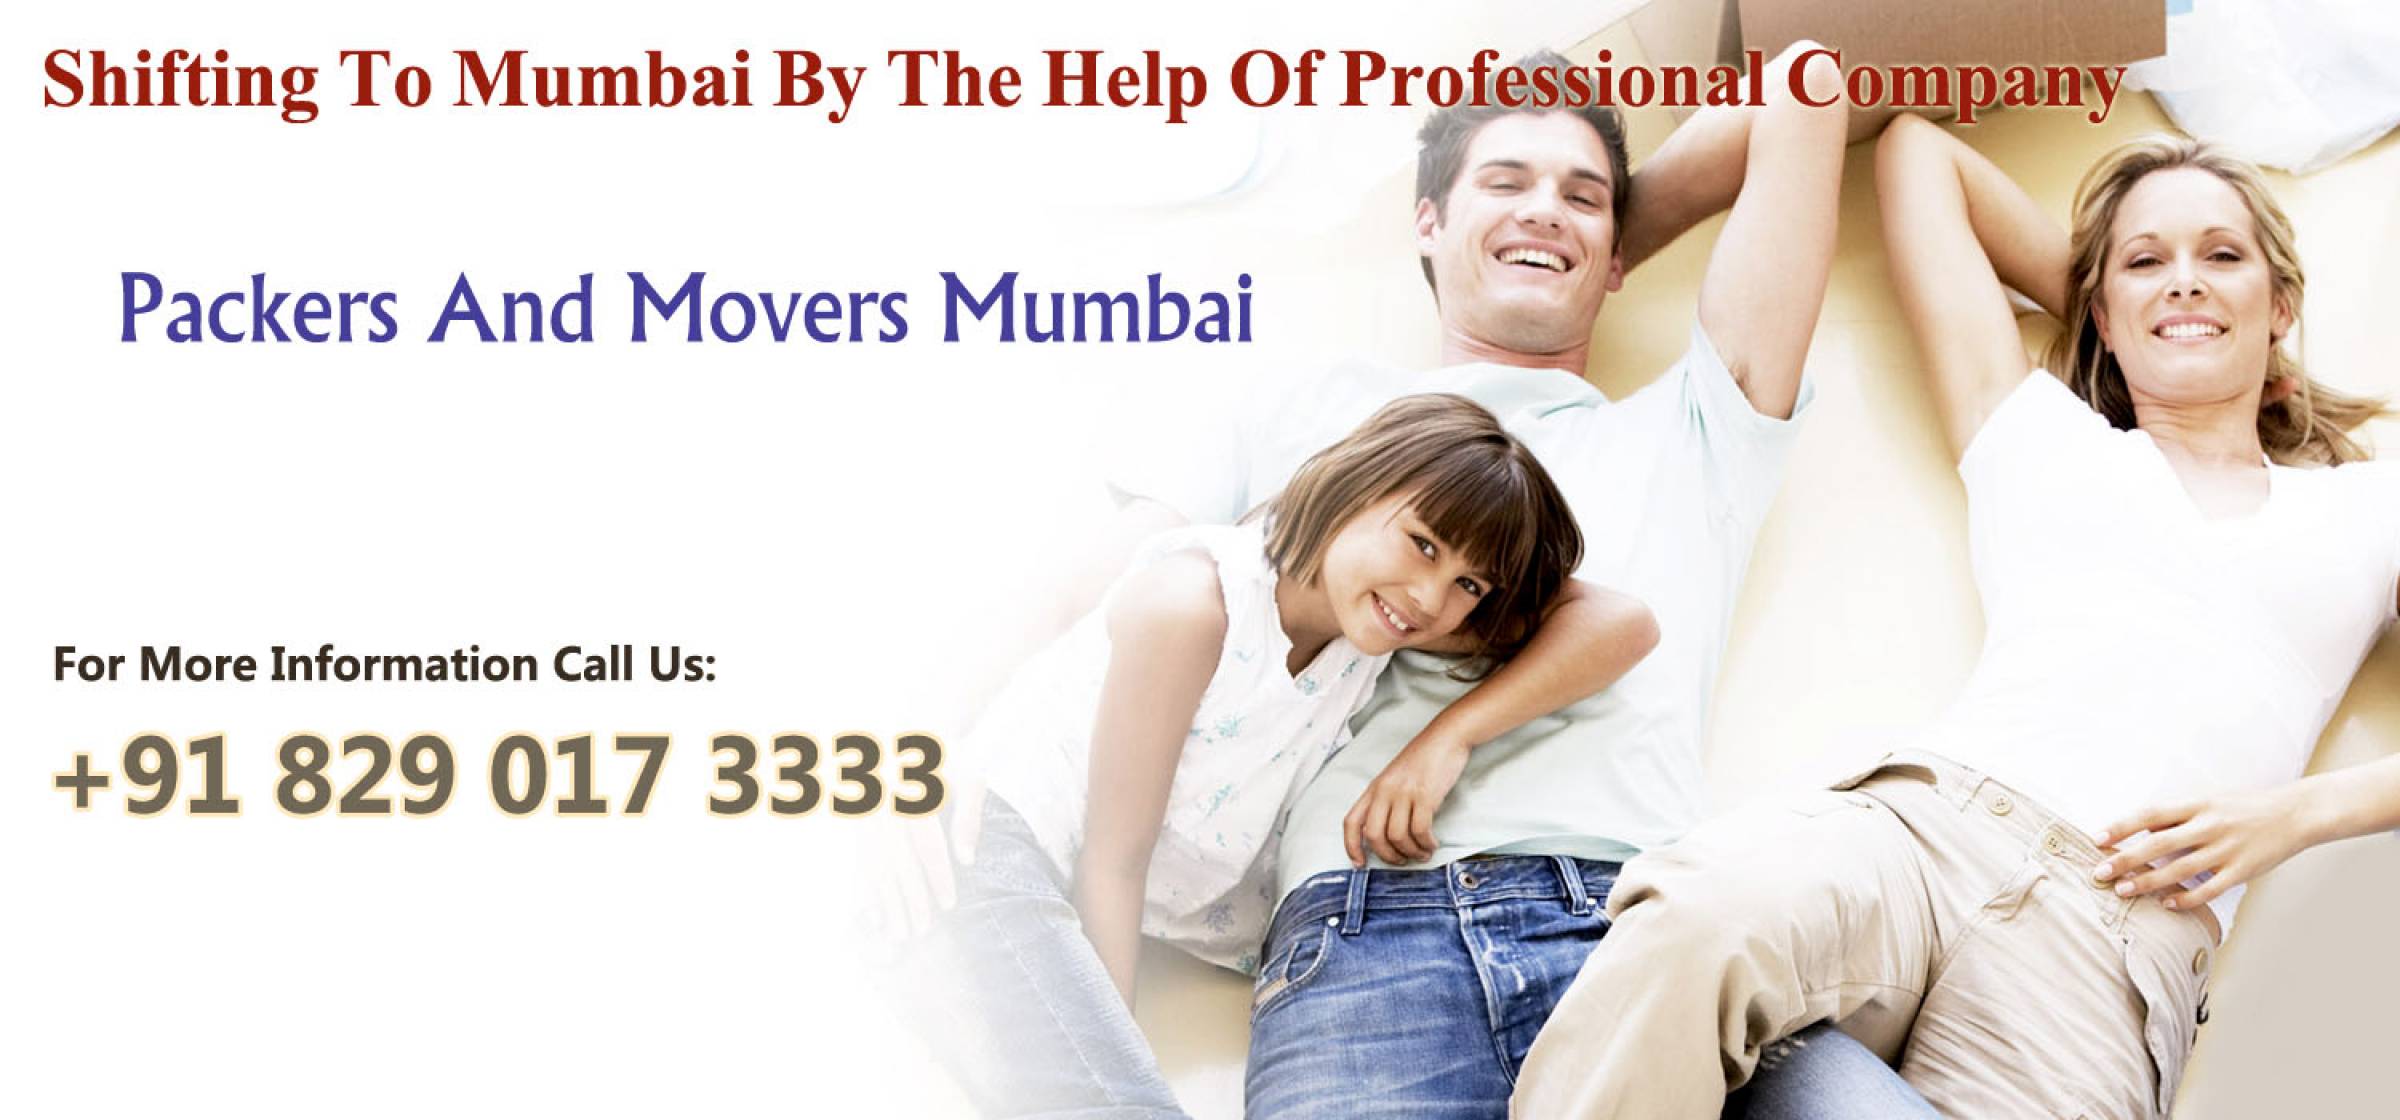 Contract Packers And Movers Mumbai To Get Dazzled With Perfect And Fiscally Shrewd Migration